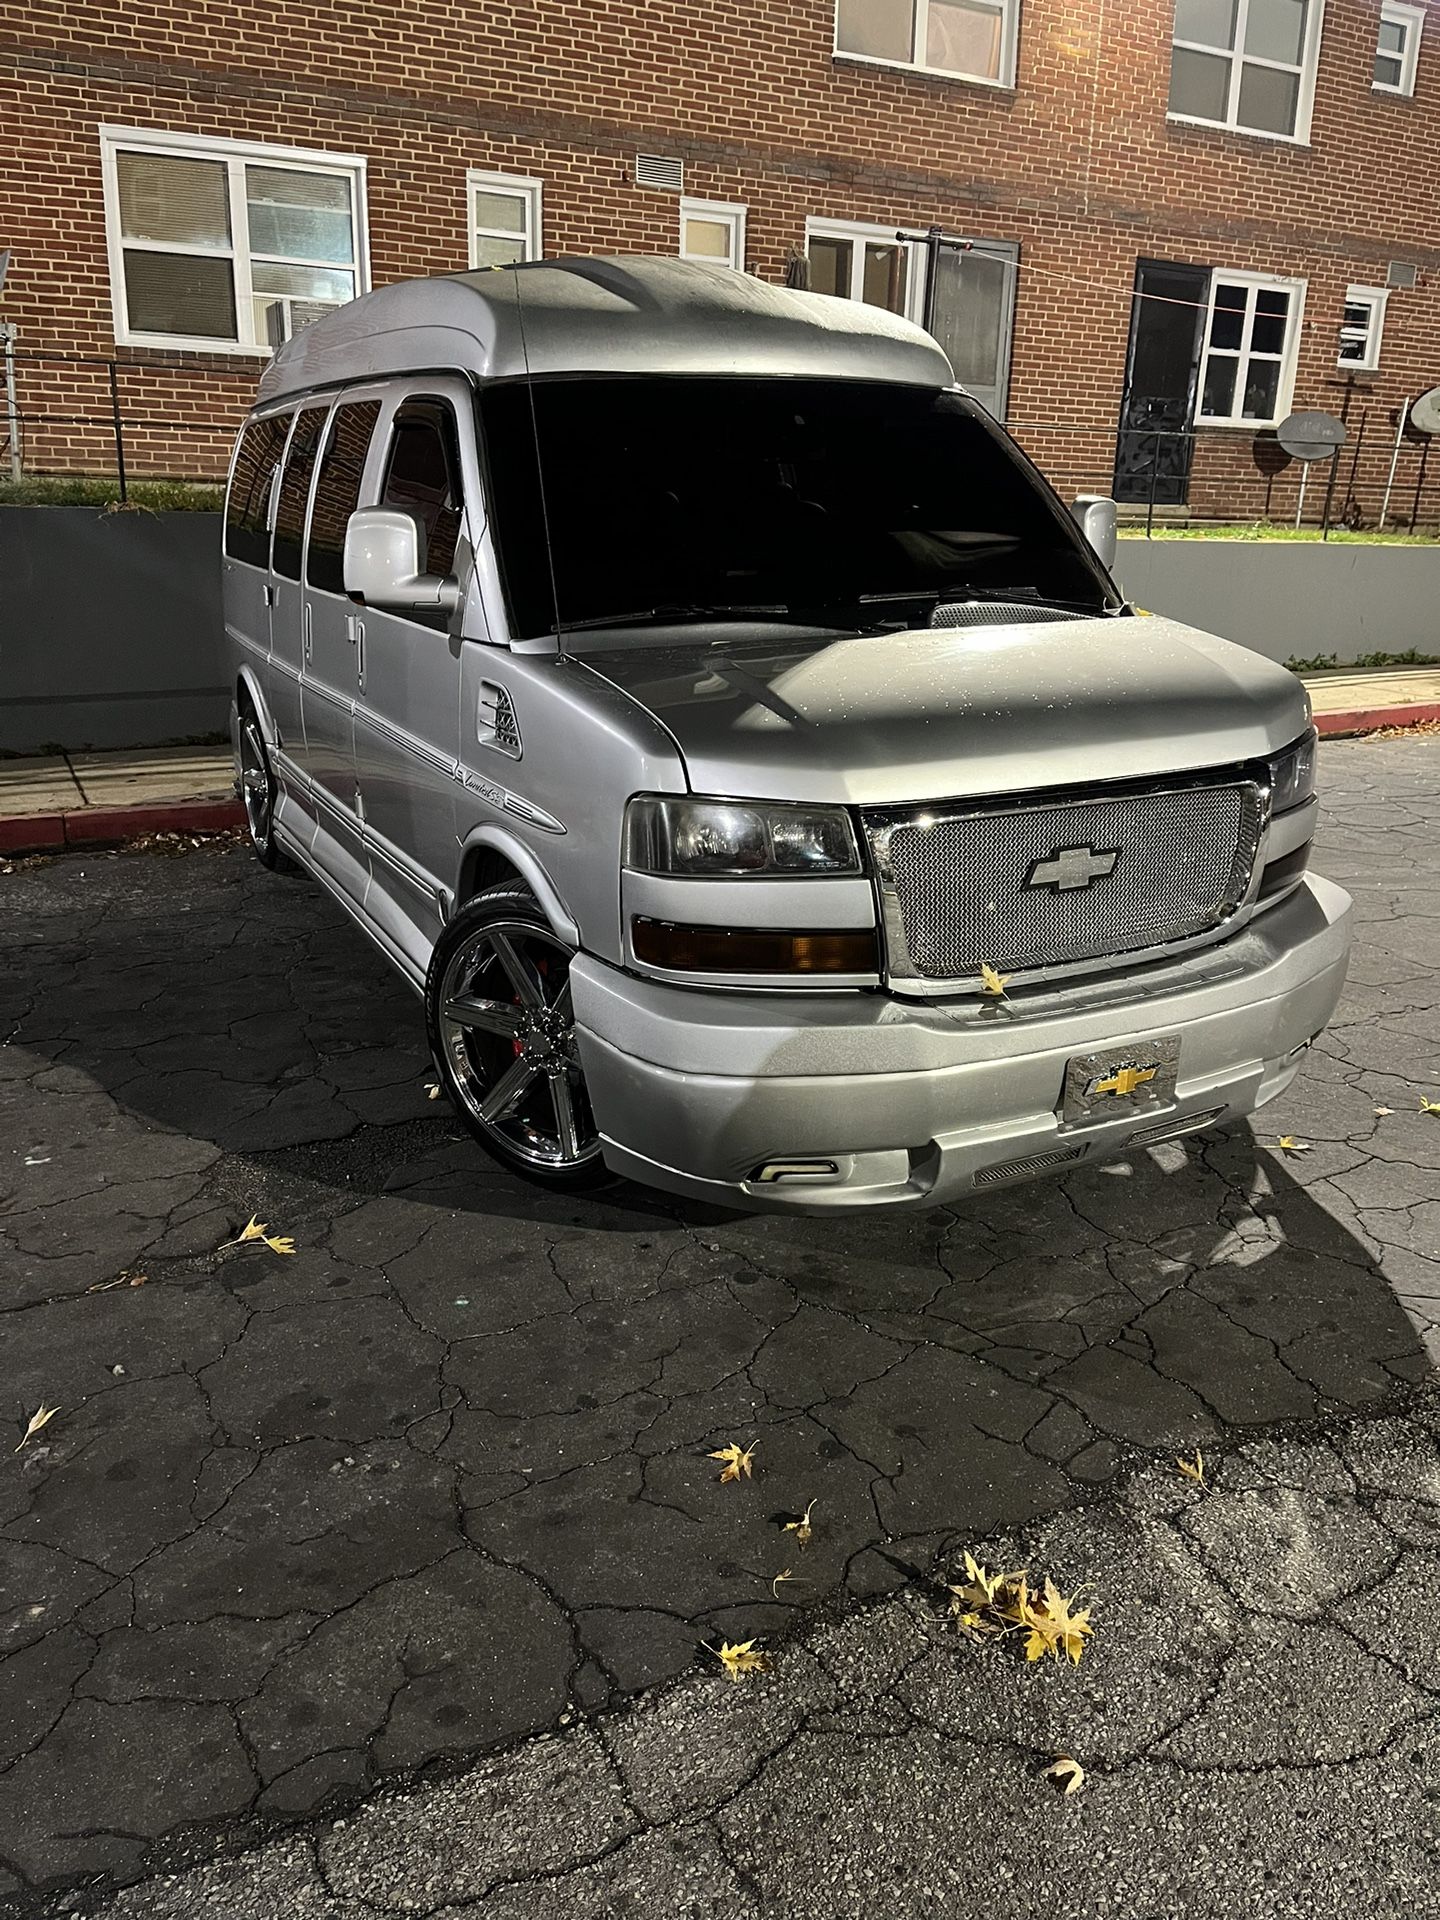 2004 Chevy Express 1500